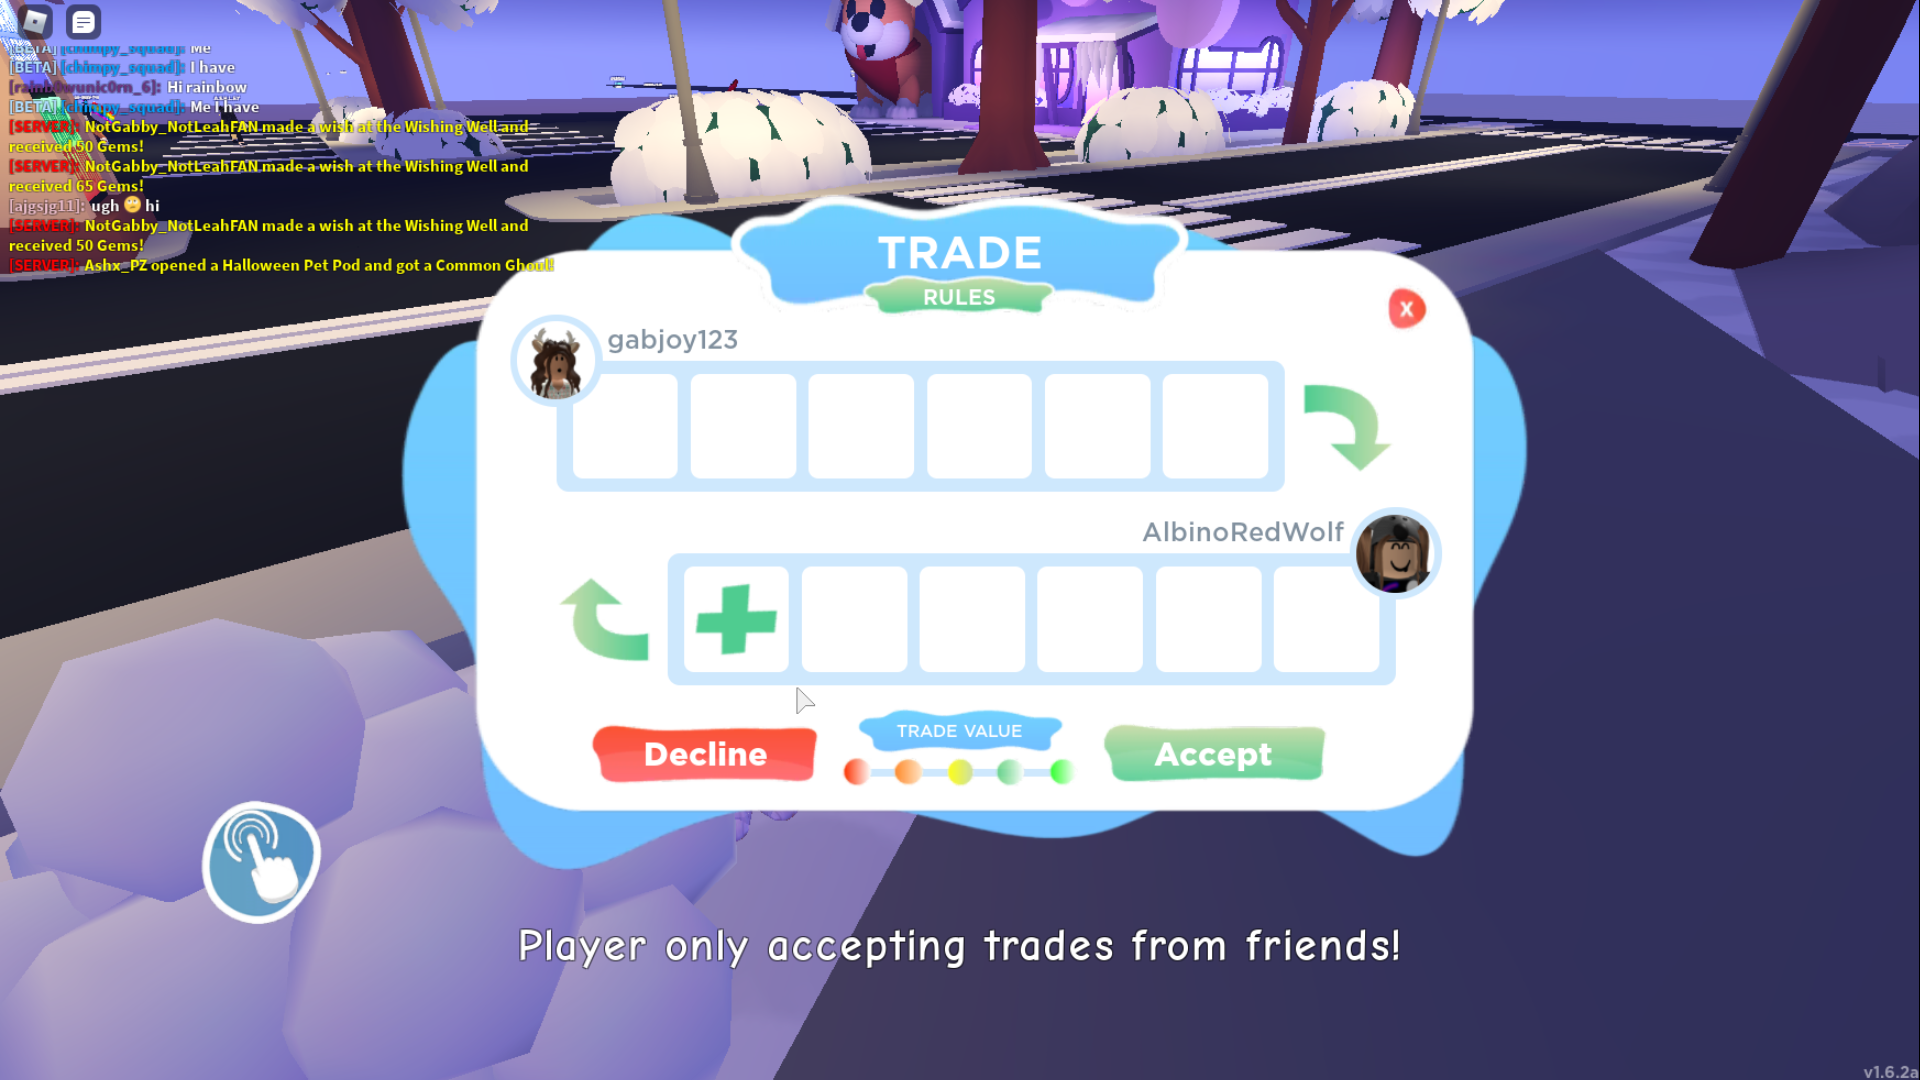 Trading System Overlook Bay Wiki Fandom - roblox trade system guide